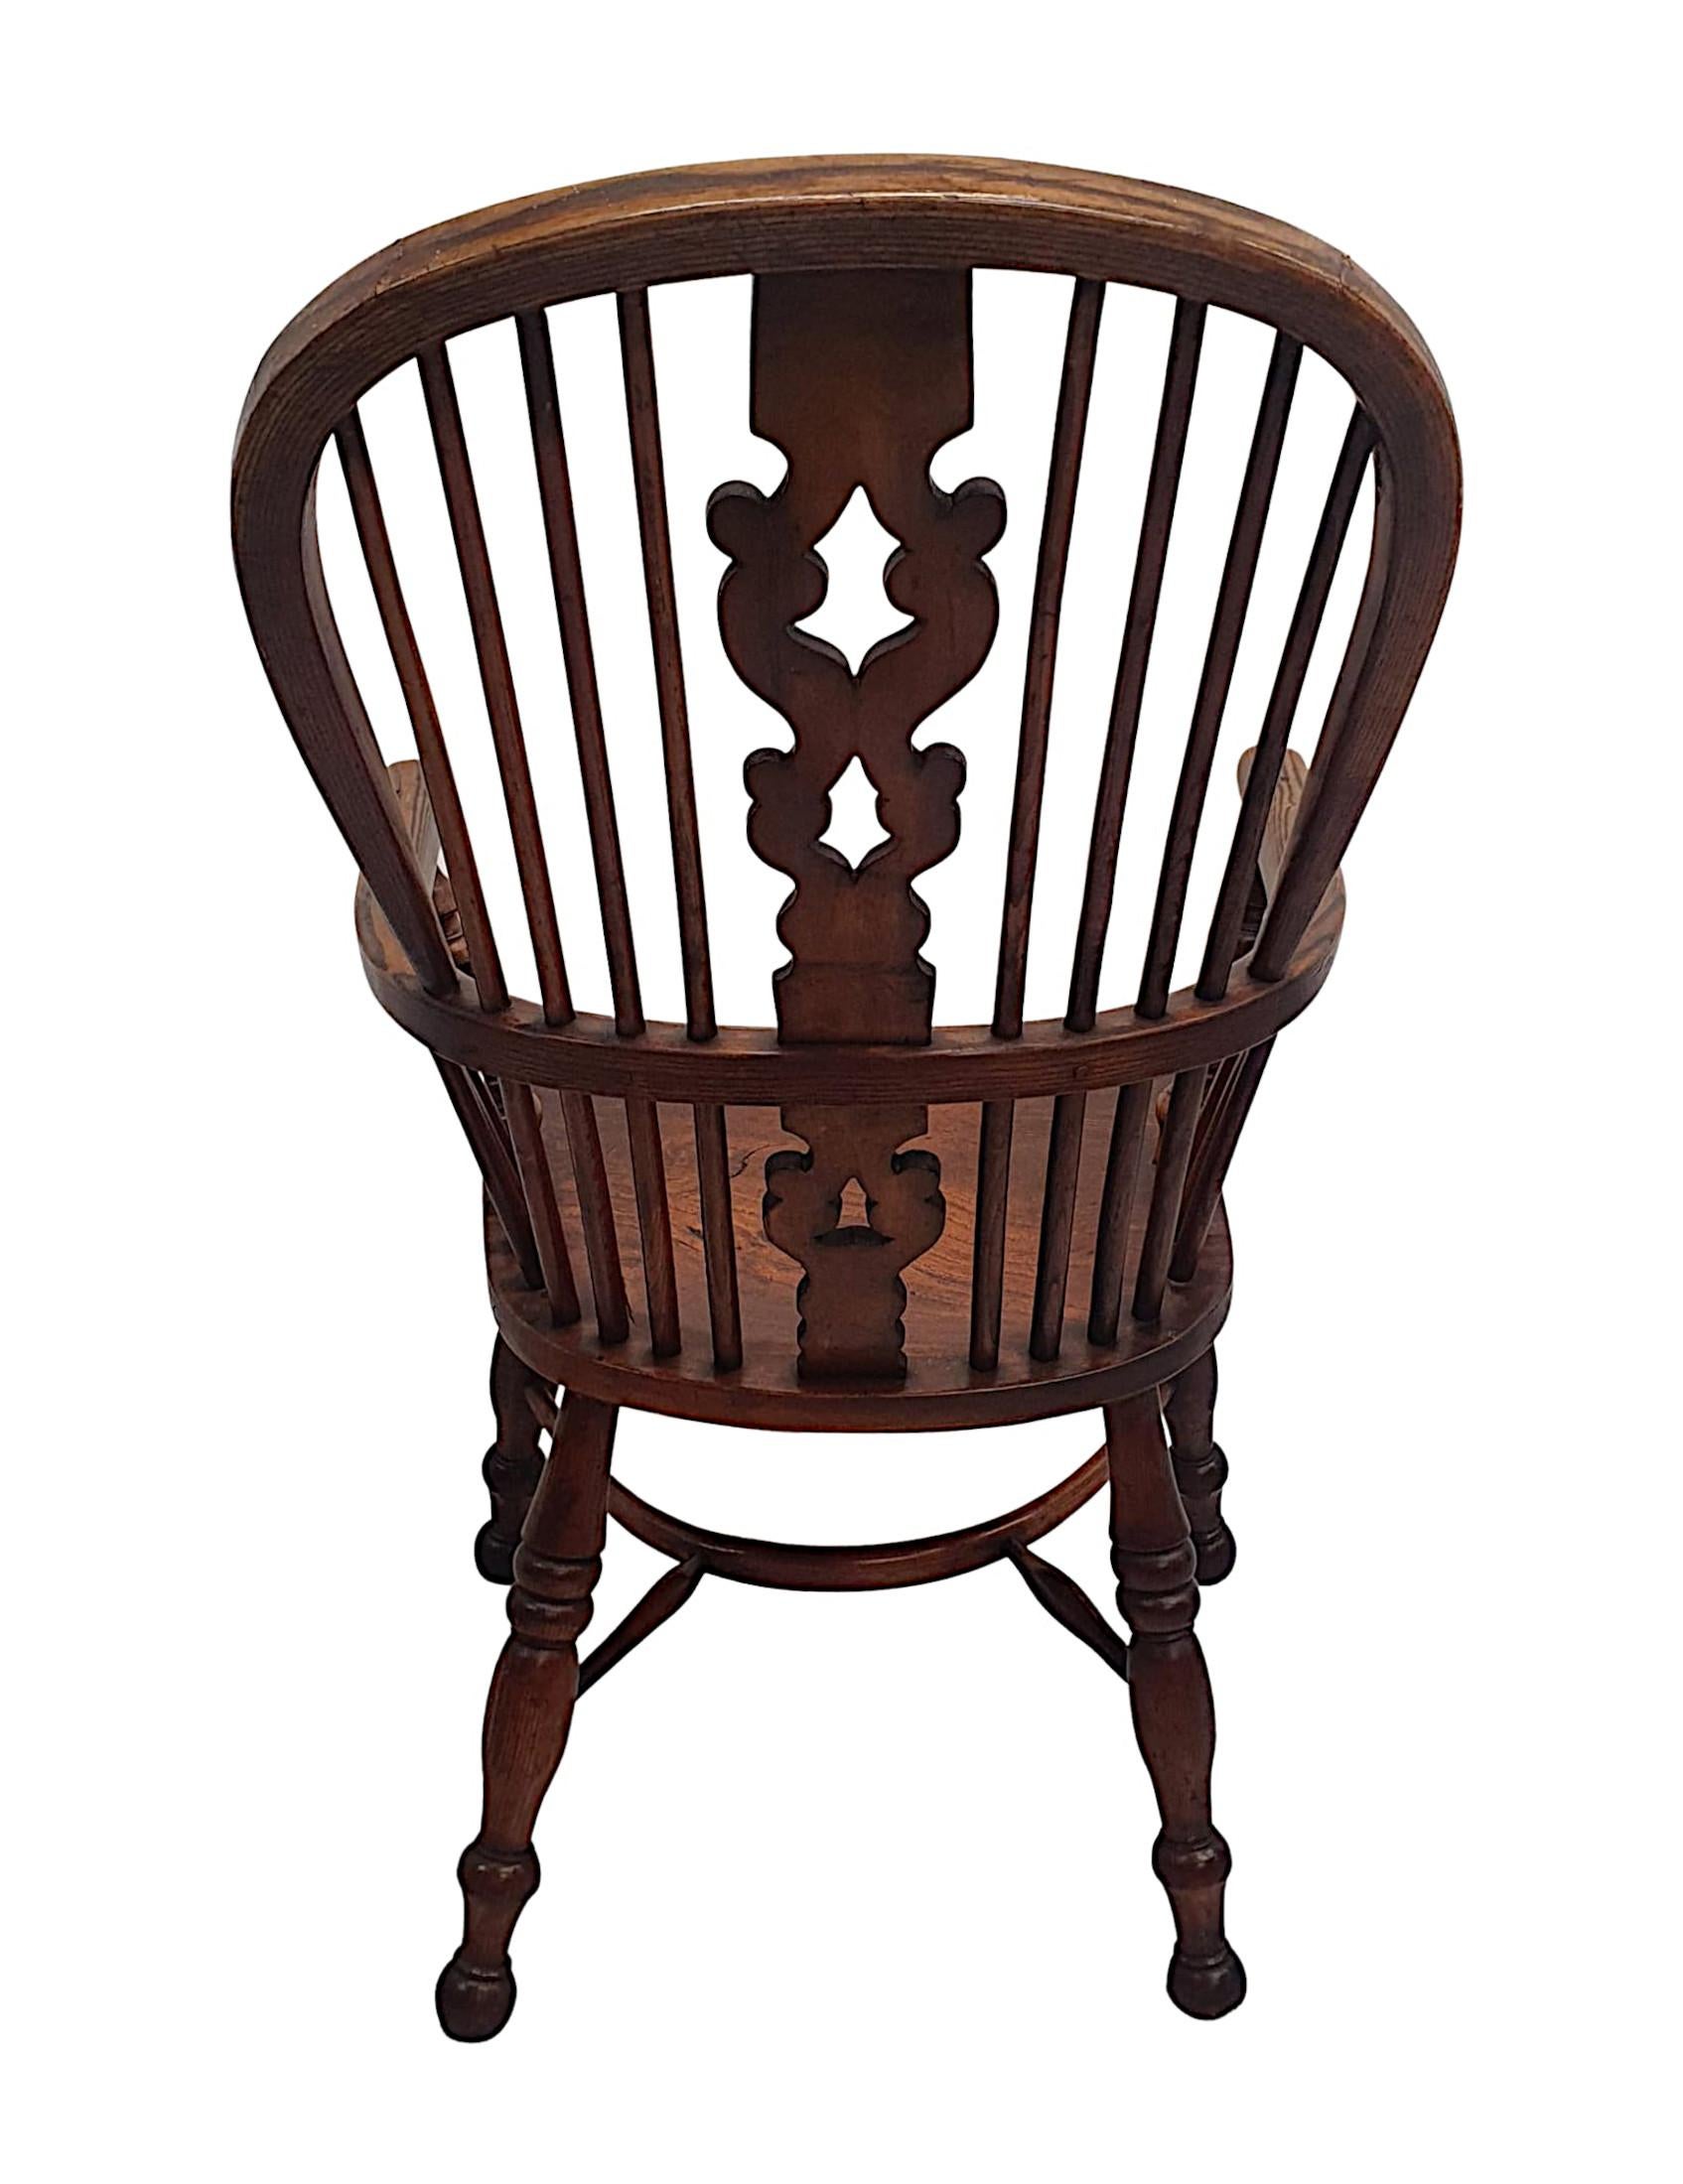 Ash Very Rare and Fine 19th Century High Back Windsor Armchair For Sale